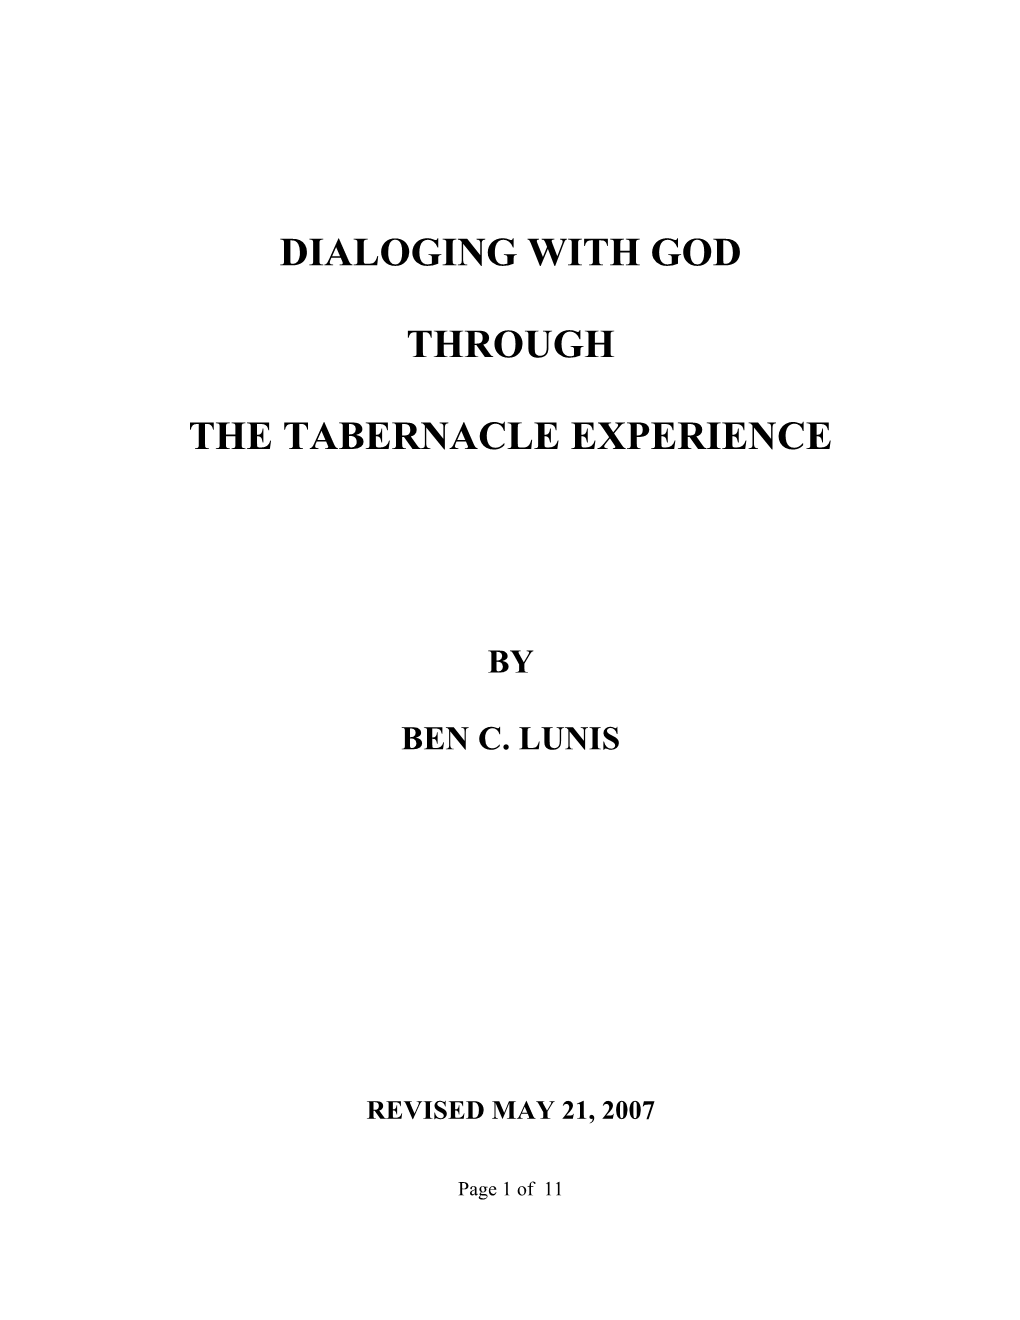 Dialoging with God Through the Tabernacle Experience